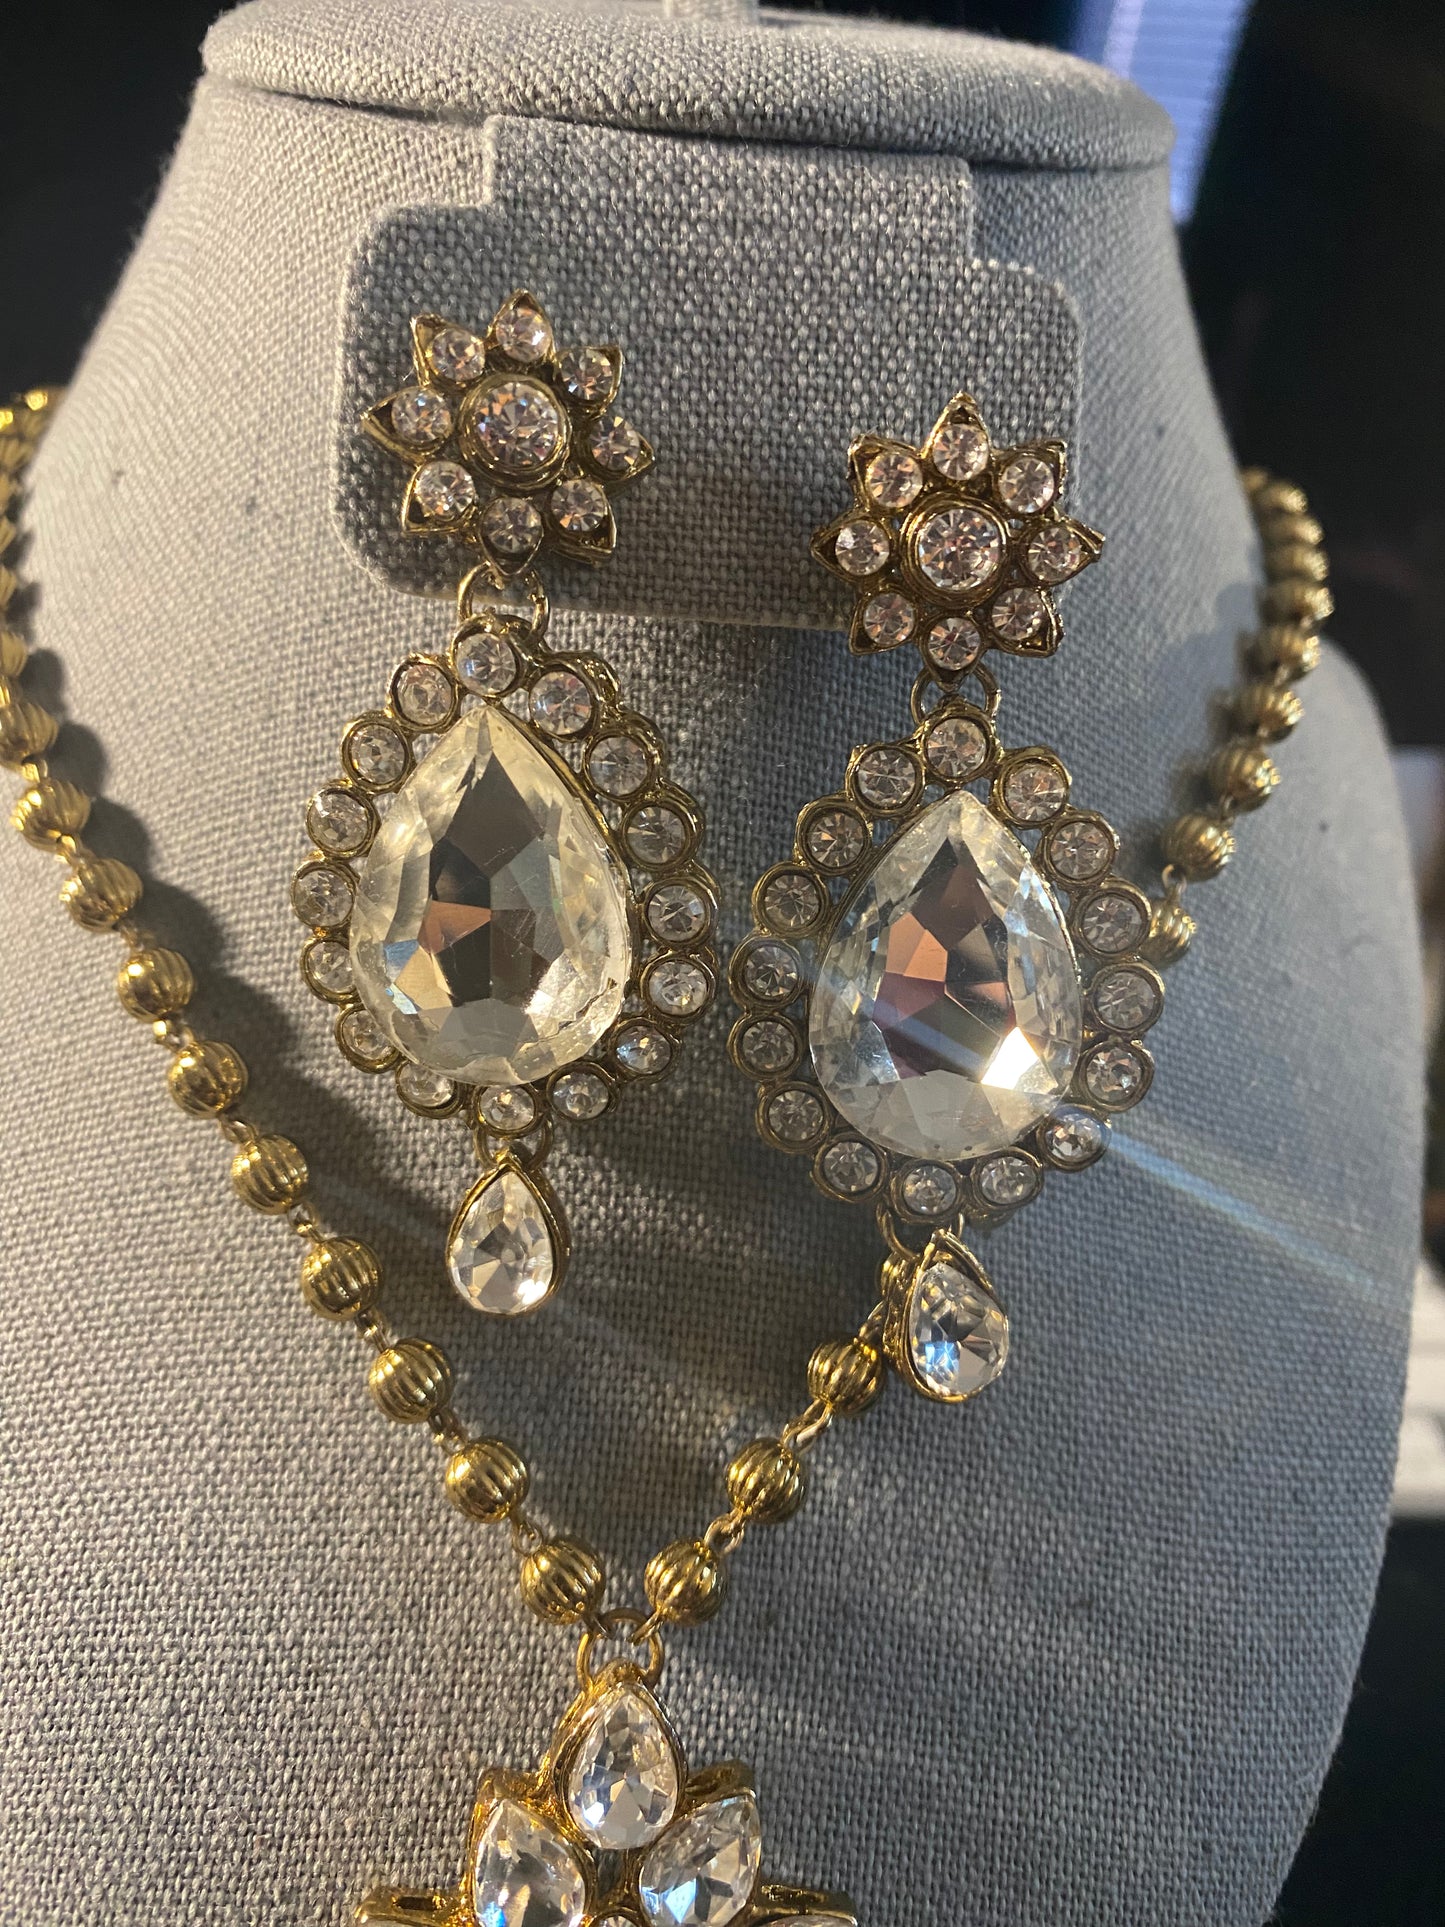 New Jewelry: Long Crystal Necklace and Earrings